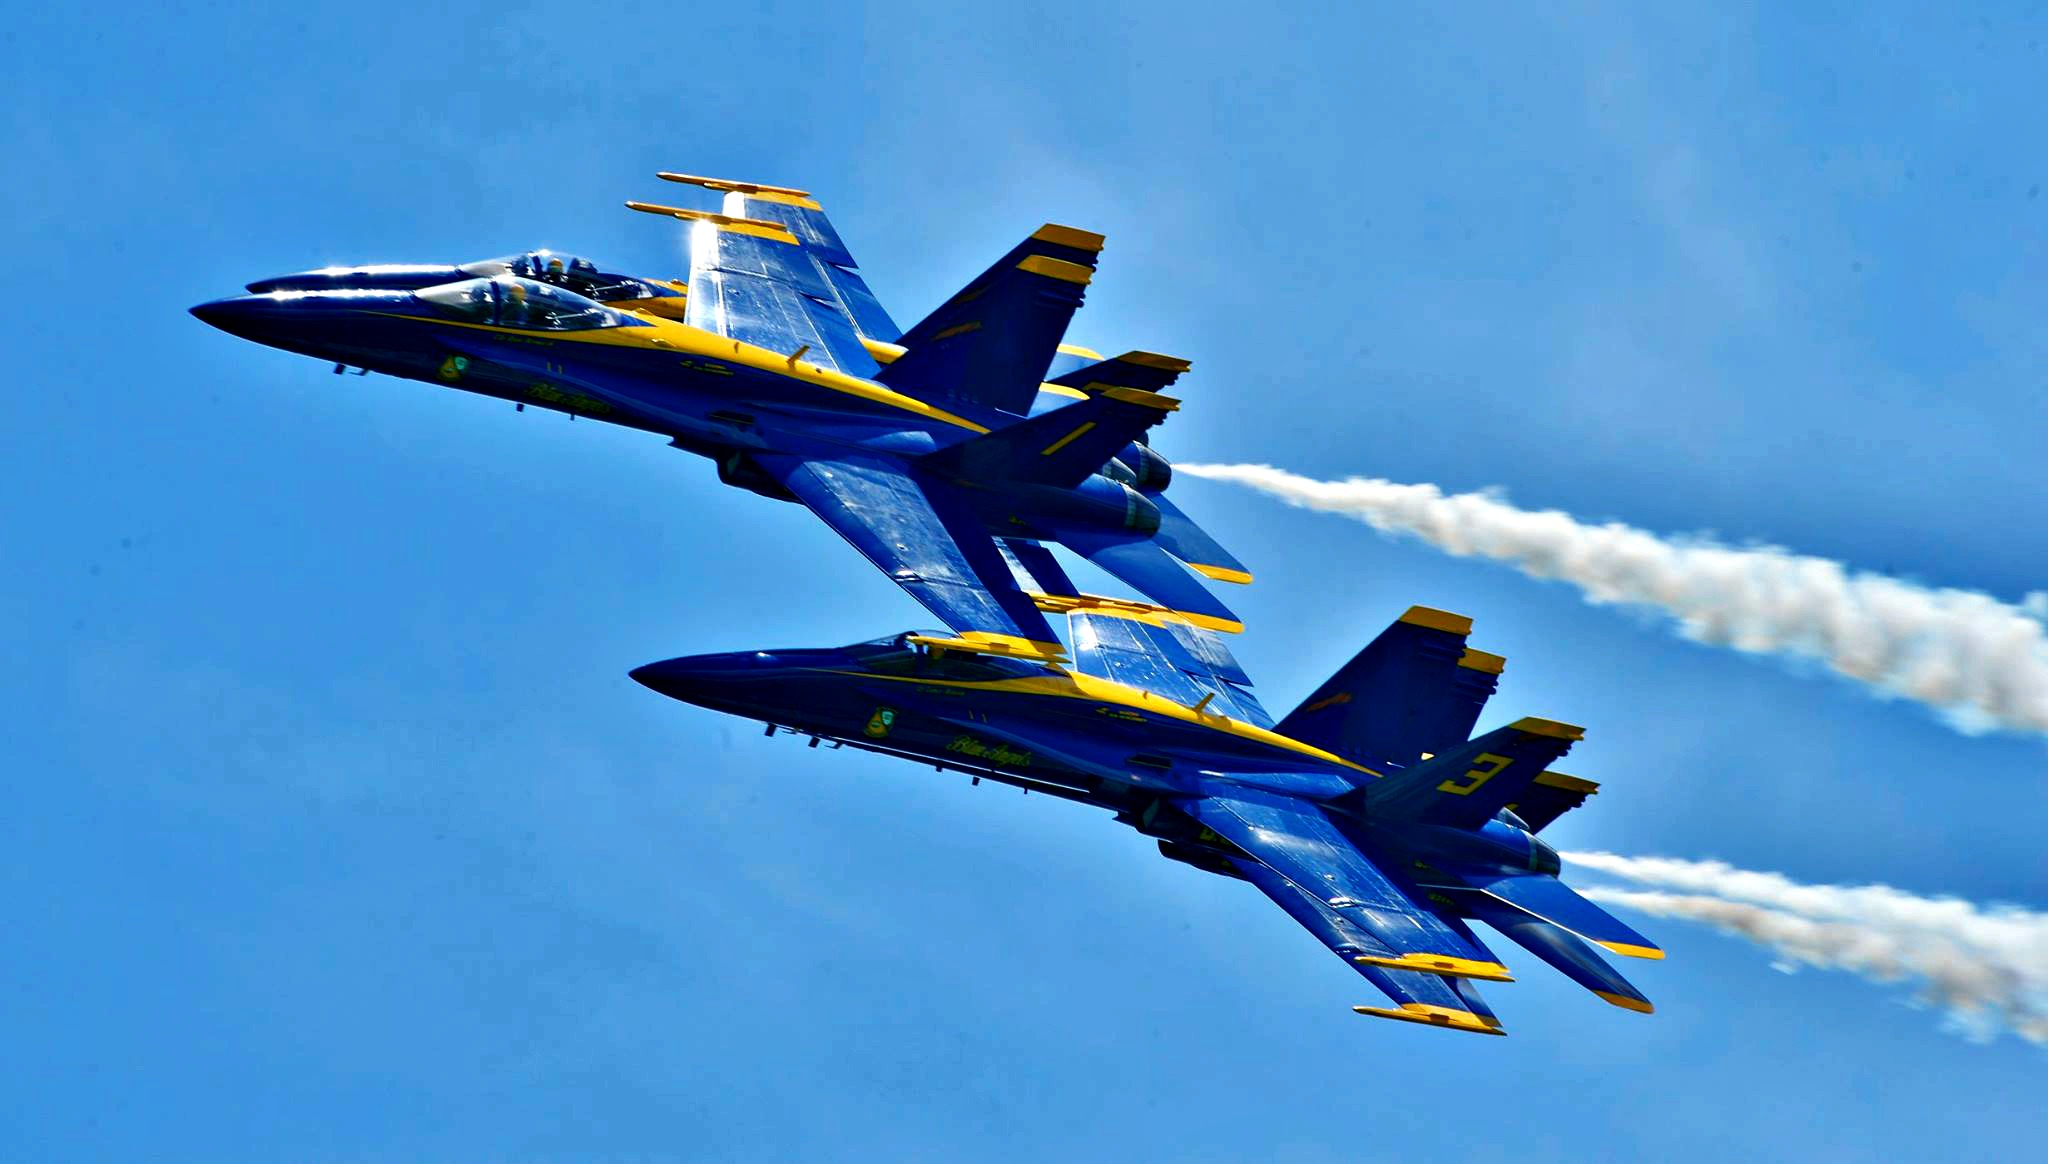 The Blue Angels flying in the Diamond 360 formation